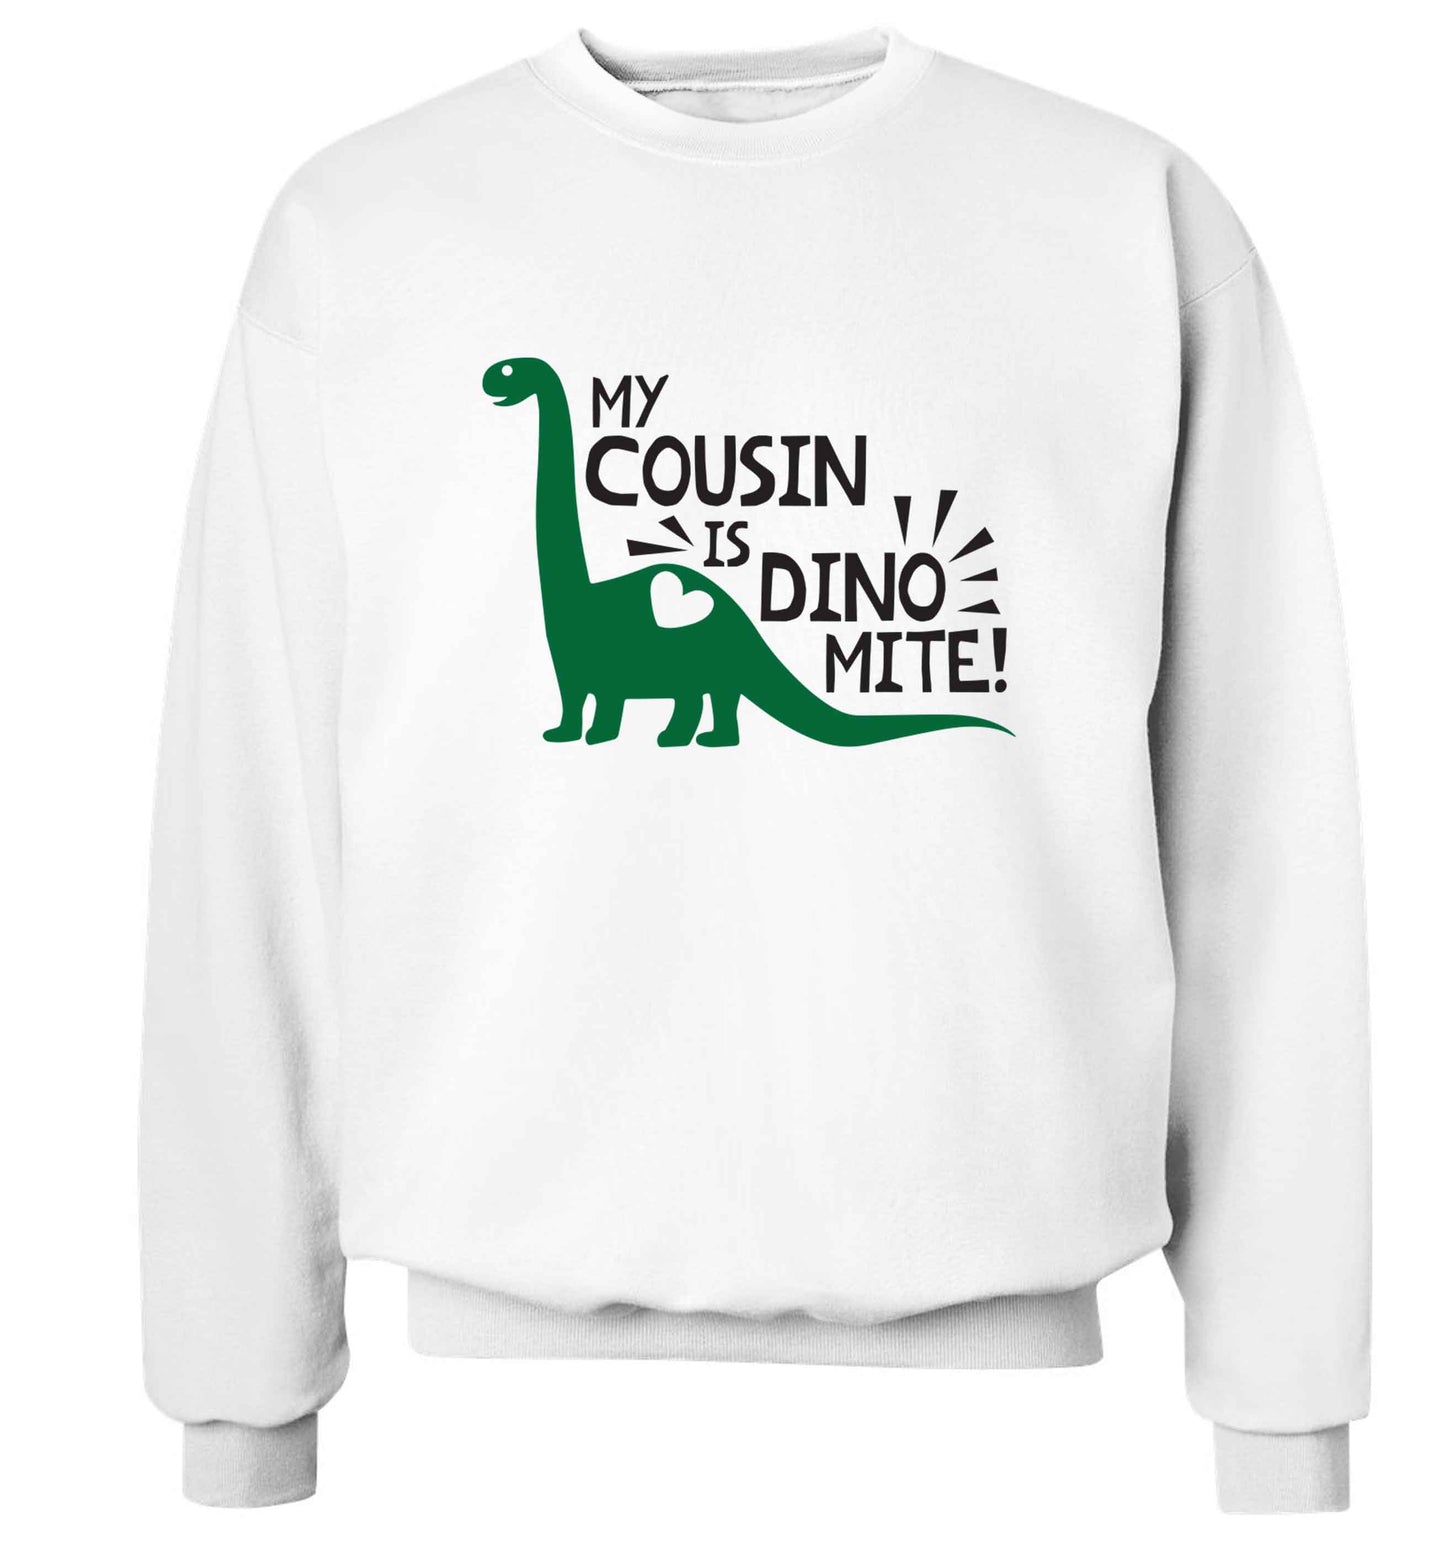 My cousin is dinomite! Adult's unisex white Sweater 2XL